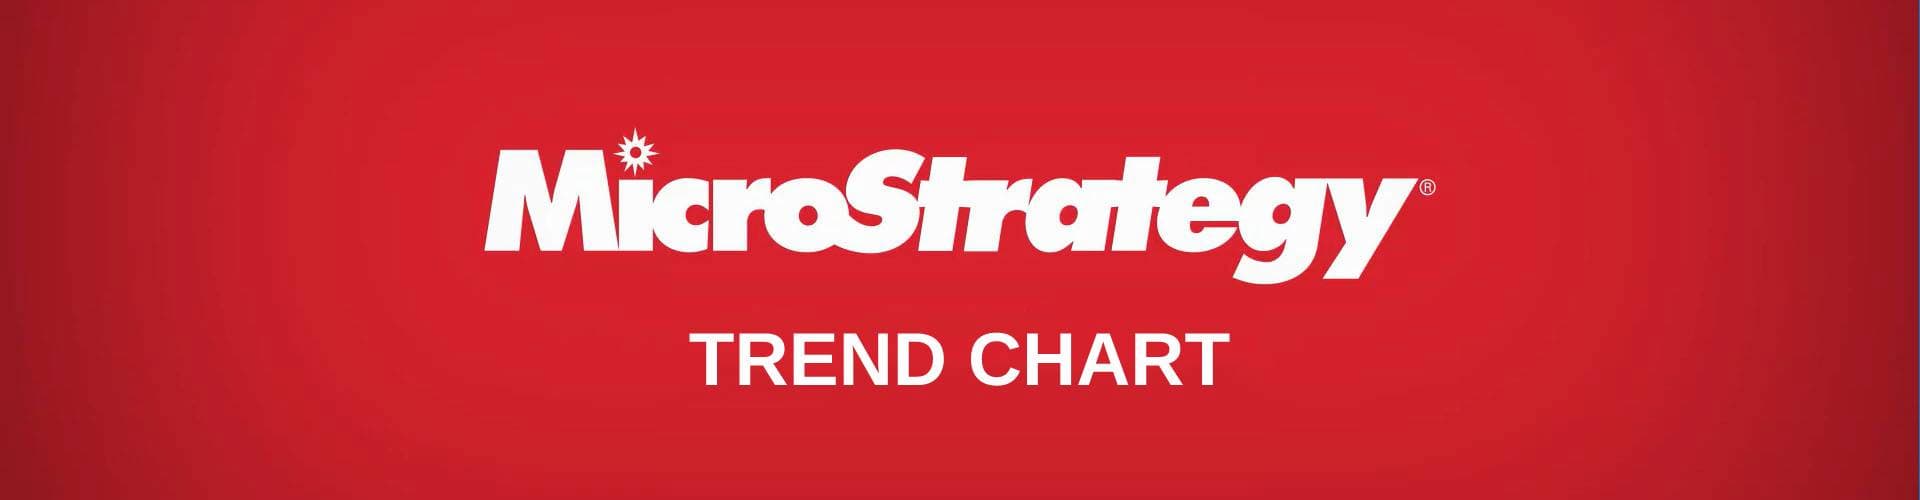 microstrategy-trend-chart